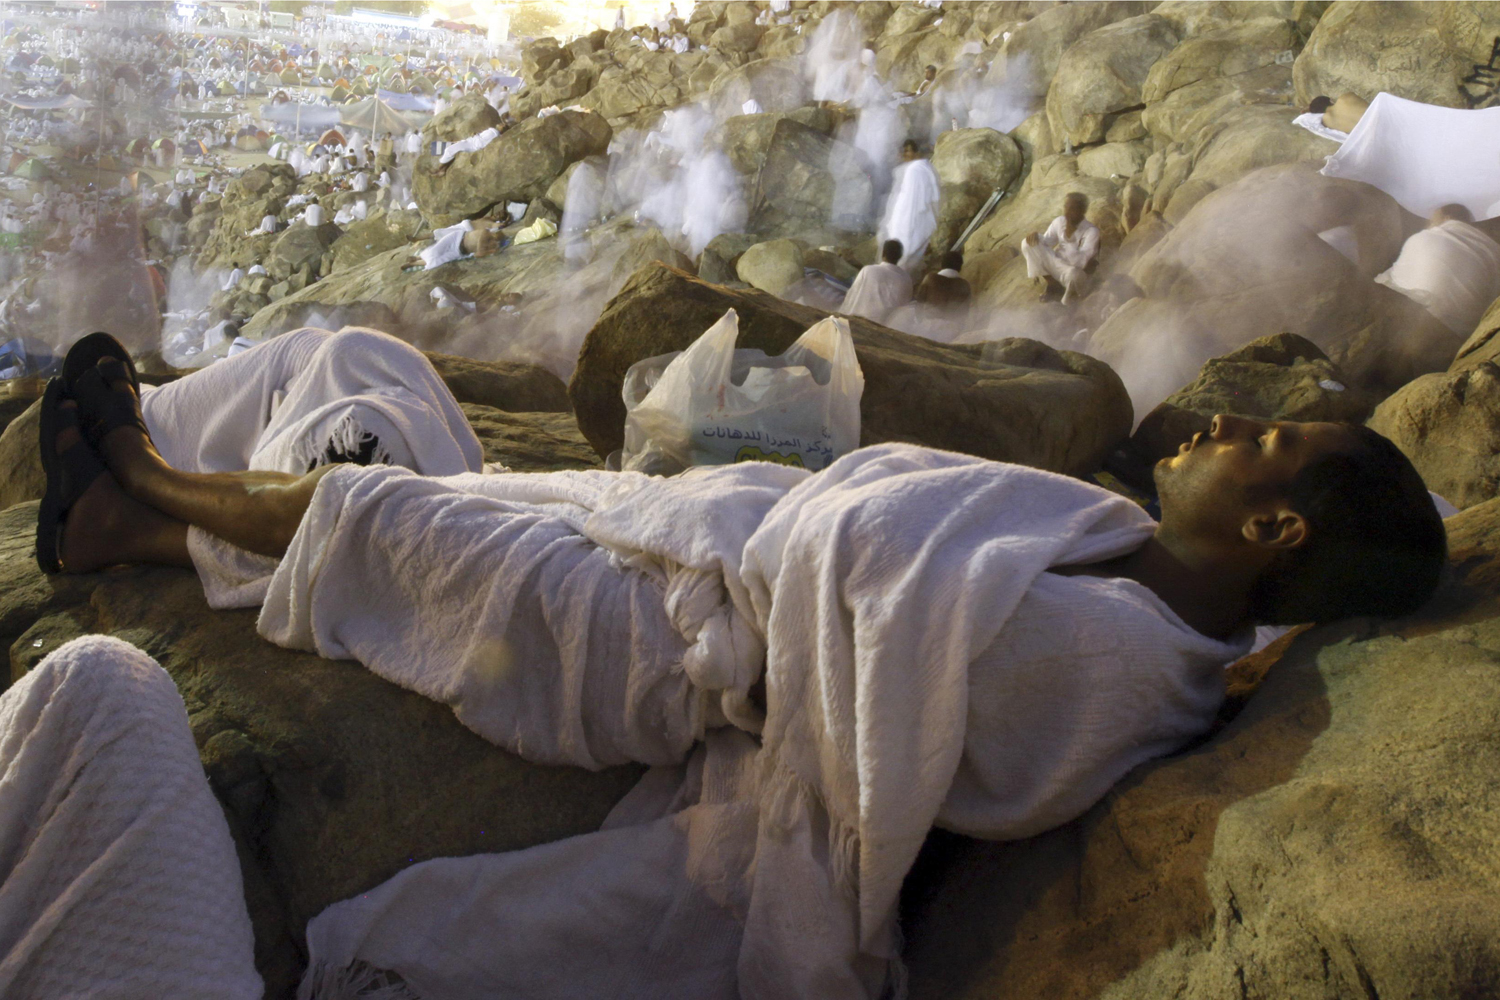 Image: Oct. 25, 2012. A Muslim pilgrim sleeps while others climb Mount Mercy on the plains of Arafat in the early morning during the peak of the annual haj pilgrimage near the holy city of Mecca.